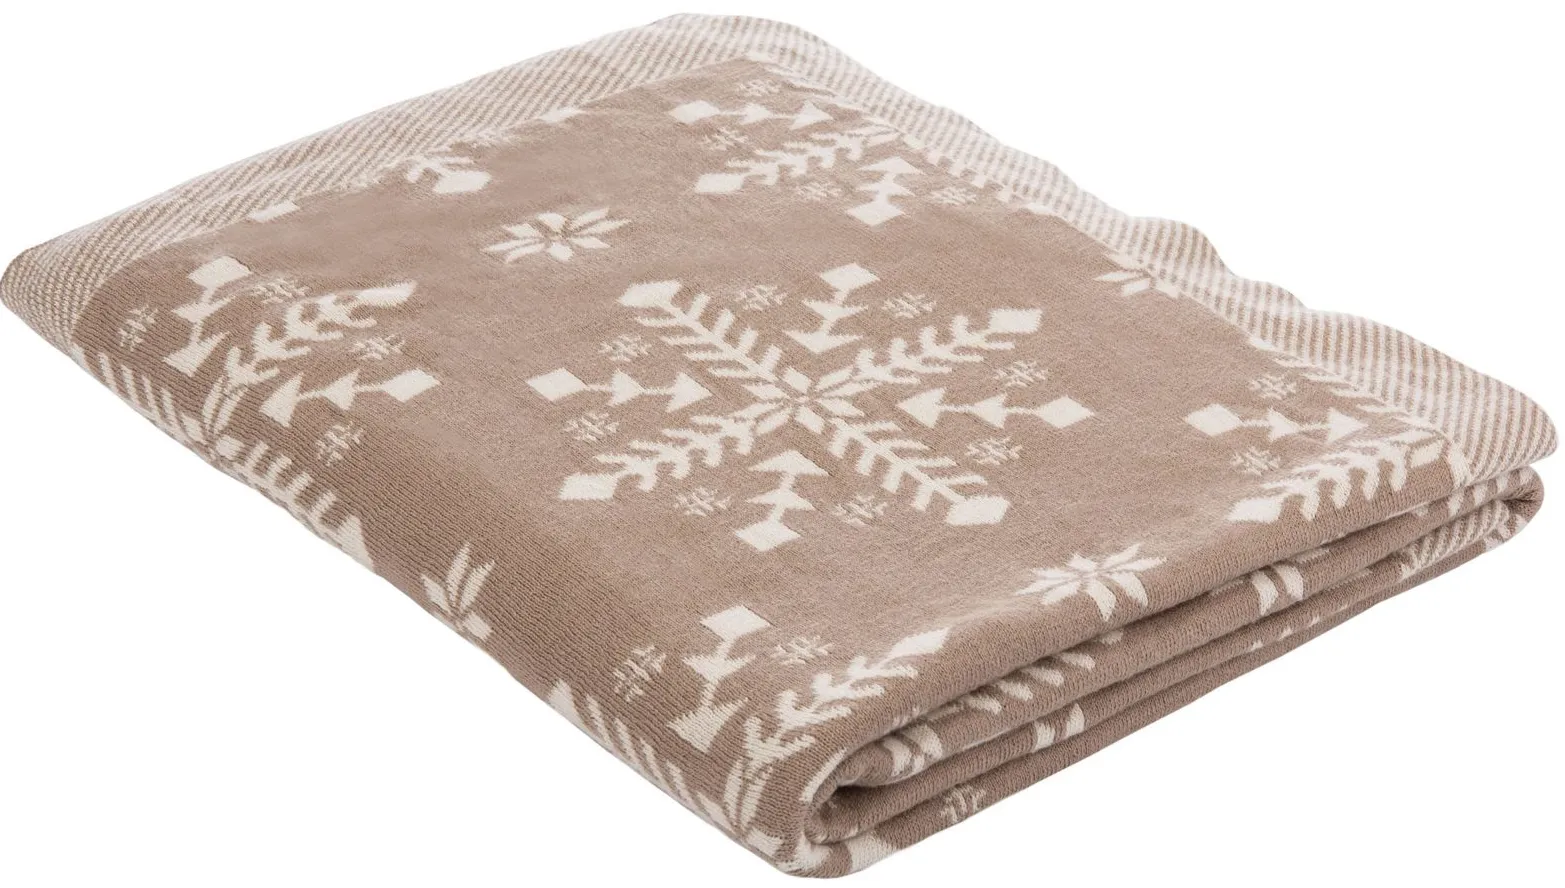 Snowflake Throw in Natural by Safavieh